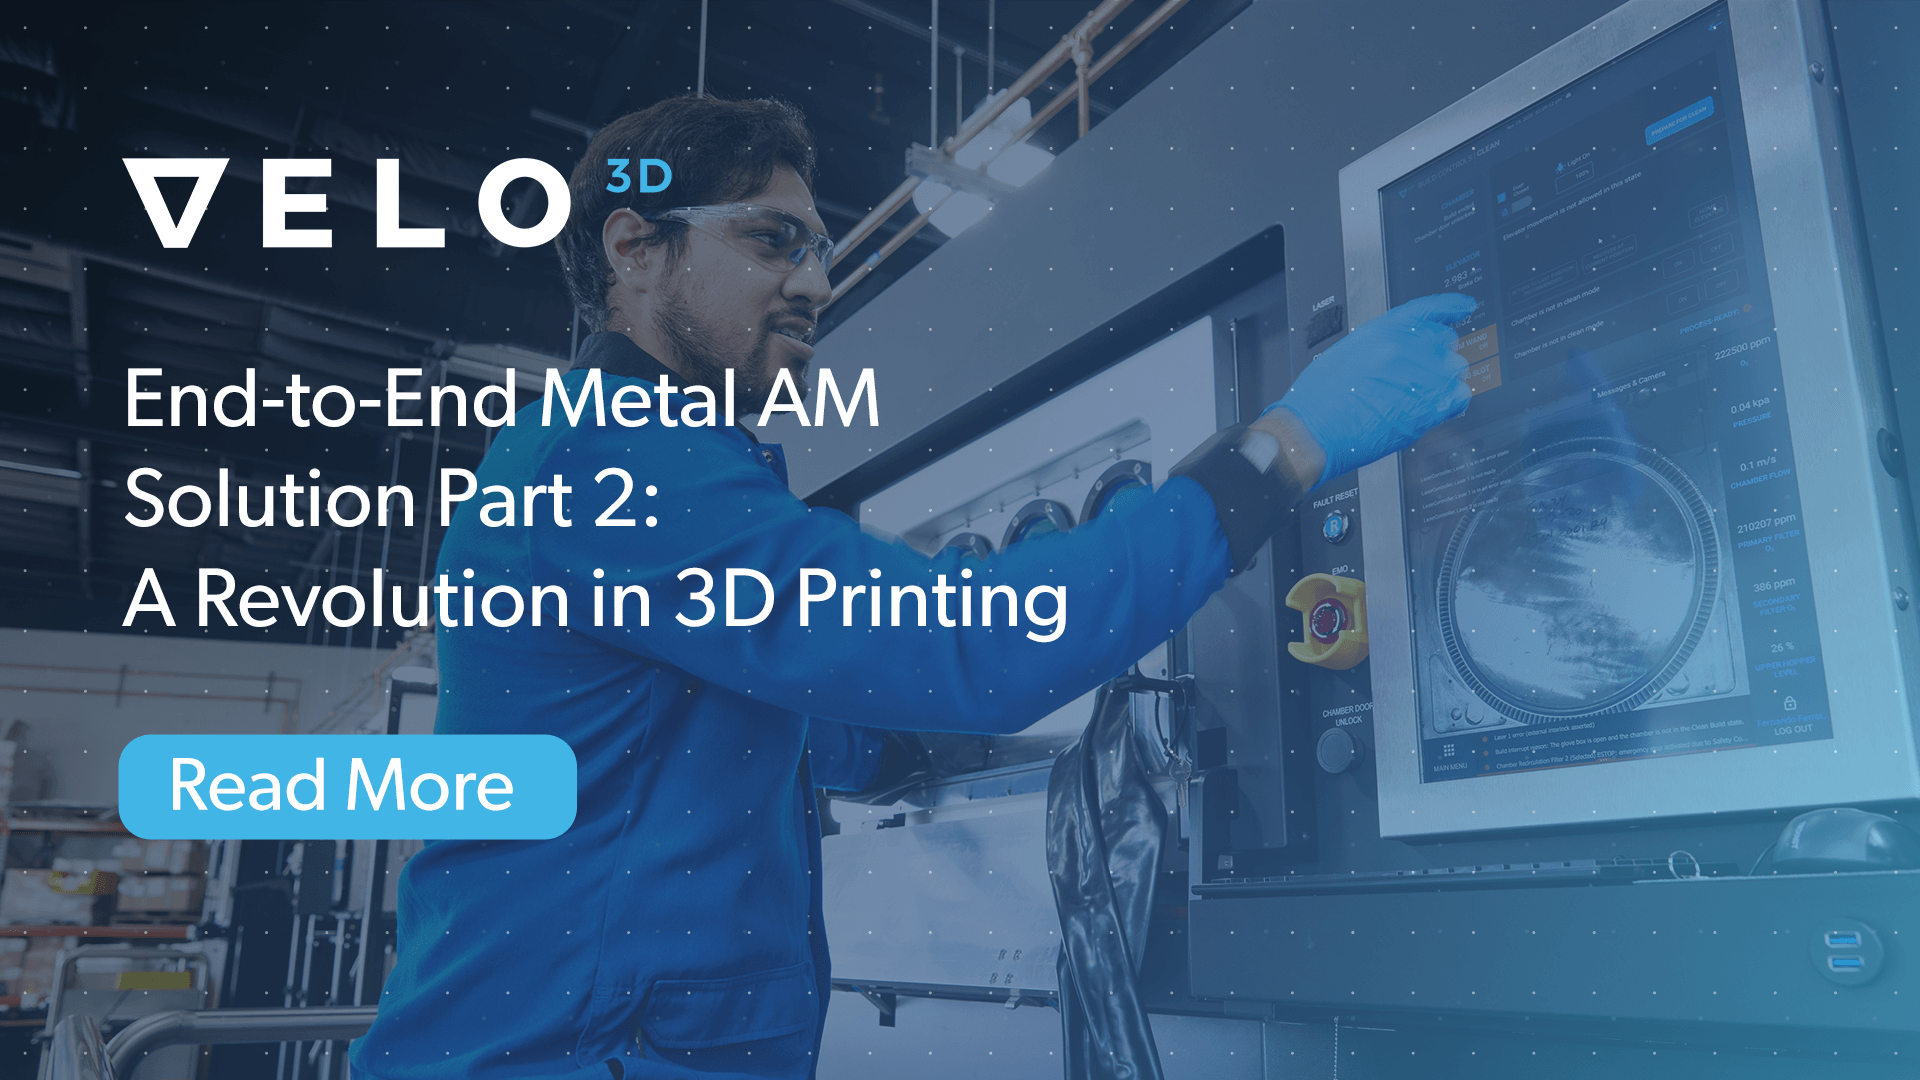 Velo3D End-to-End Metal AM Solution